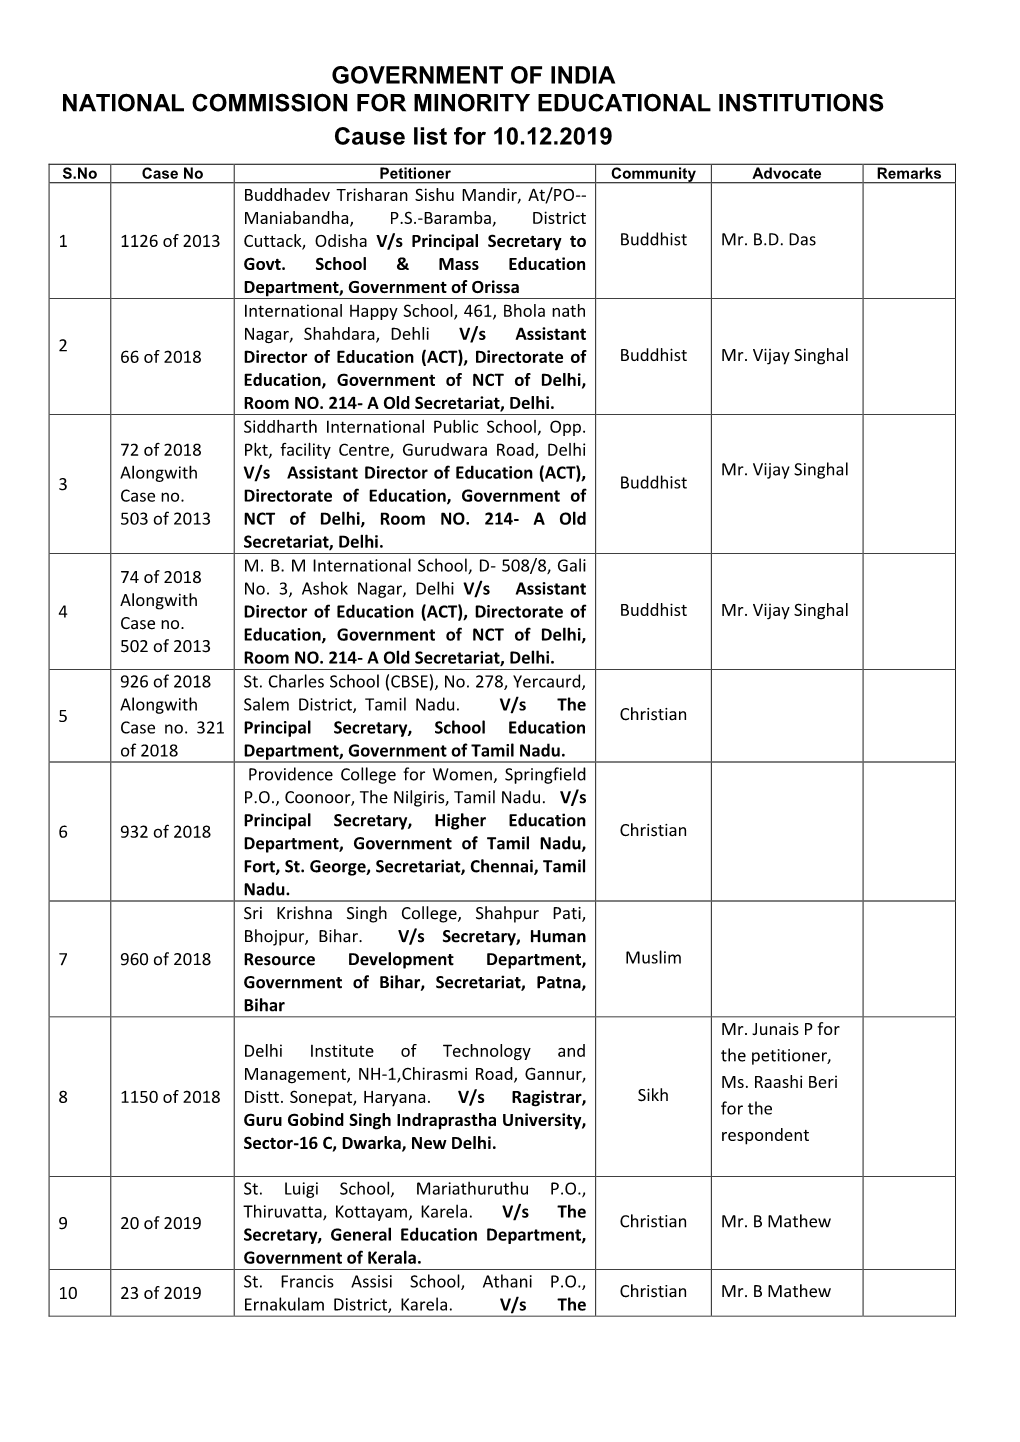 GOVERNMENT of INDIA NATIONAL COMMISSION for MINORITY EDUCATIONAL INSTITUTIONS Cause List for 10.12.2019